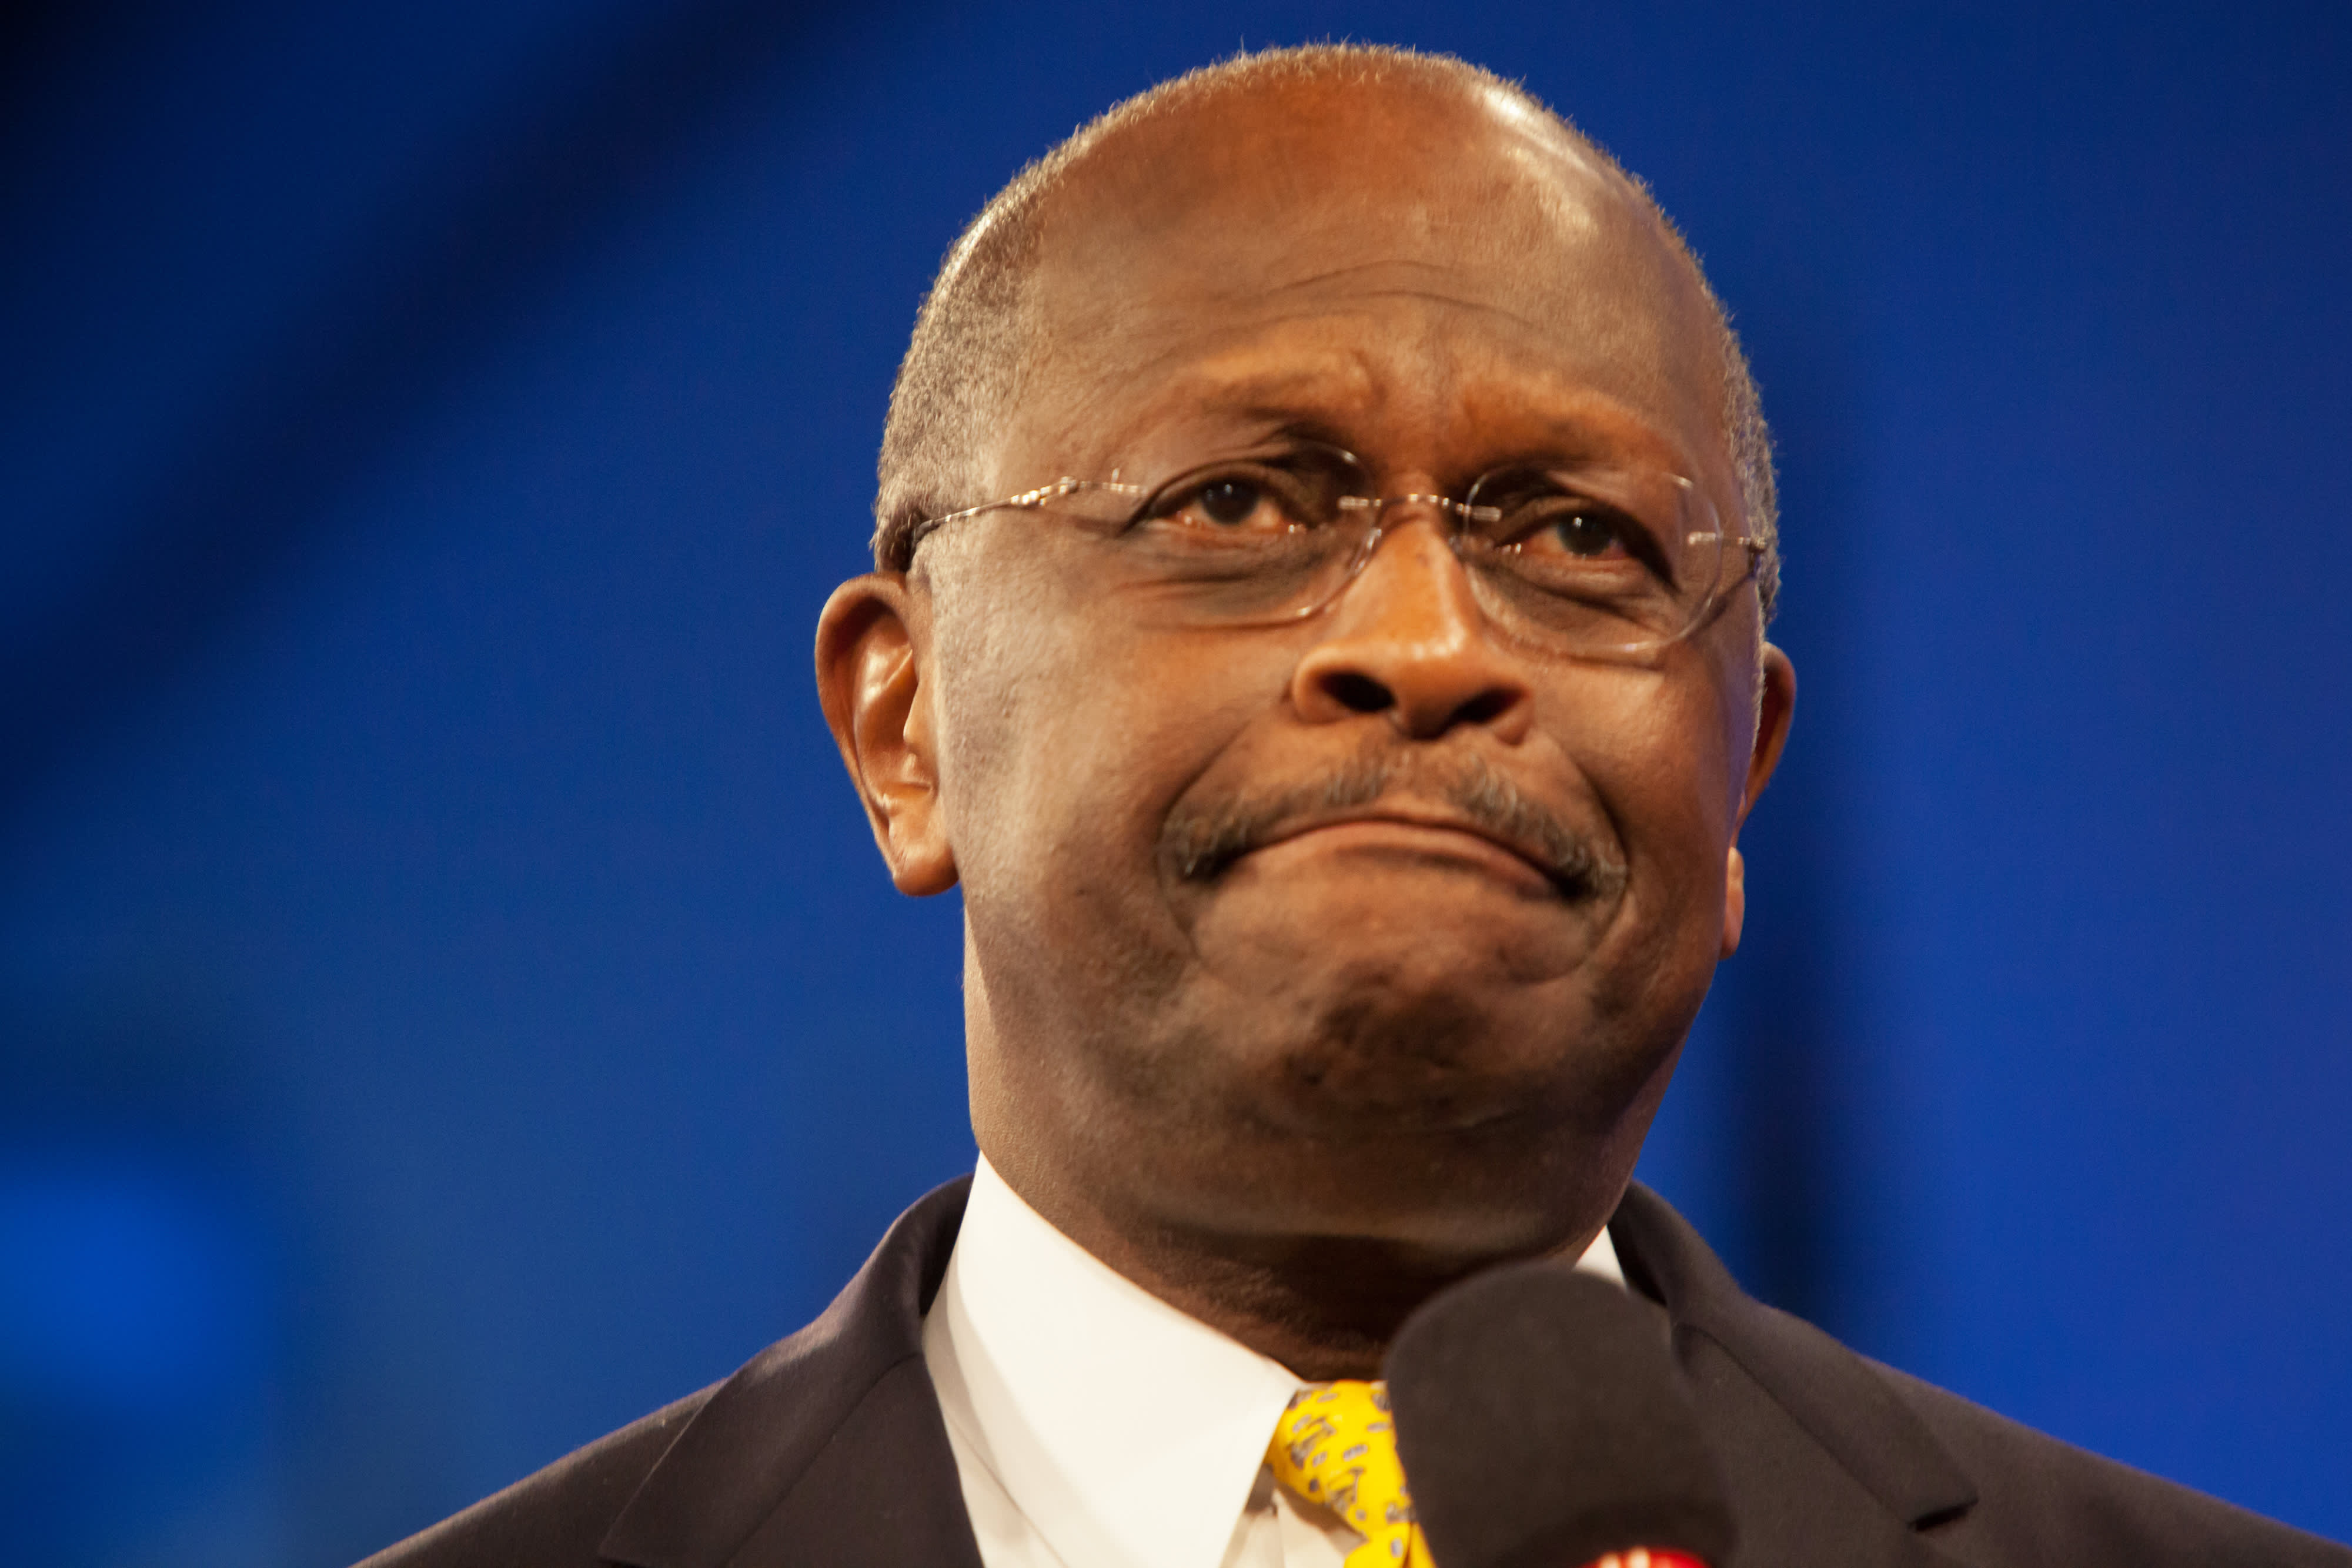 Former GOP presidential candidate Herman Cain dies after battle with coronavirus - CNBC thumbnail